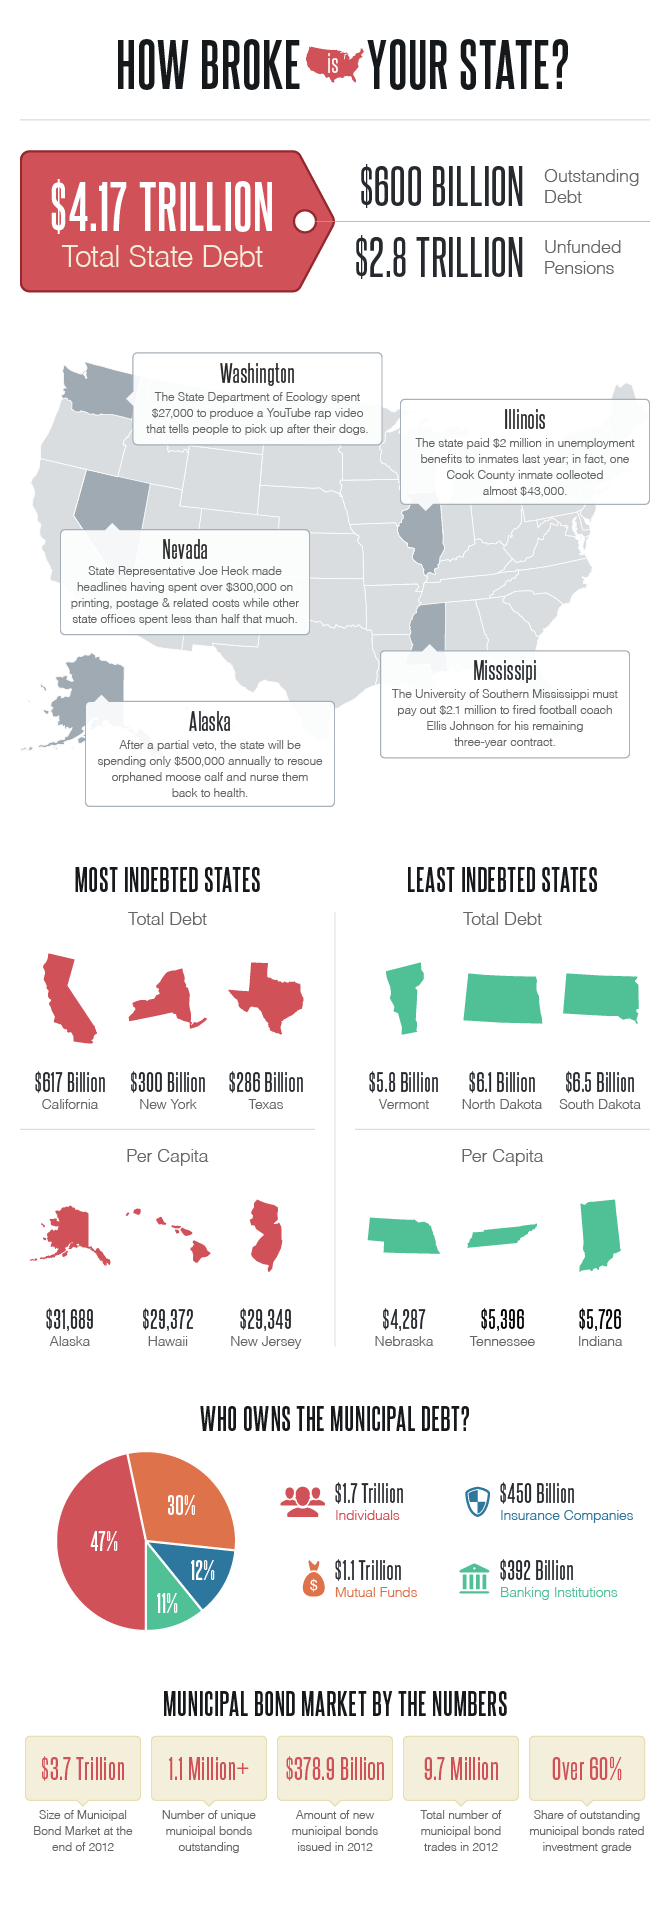 Wealthiest States in the US